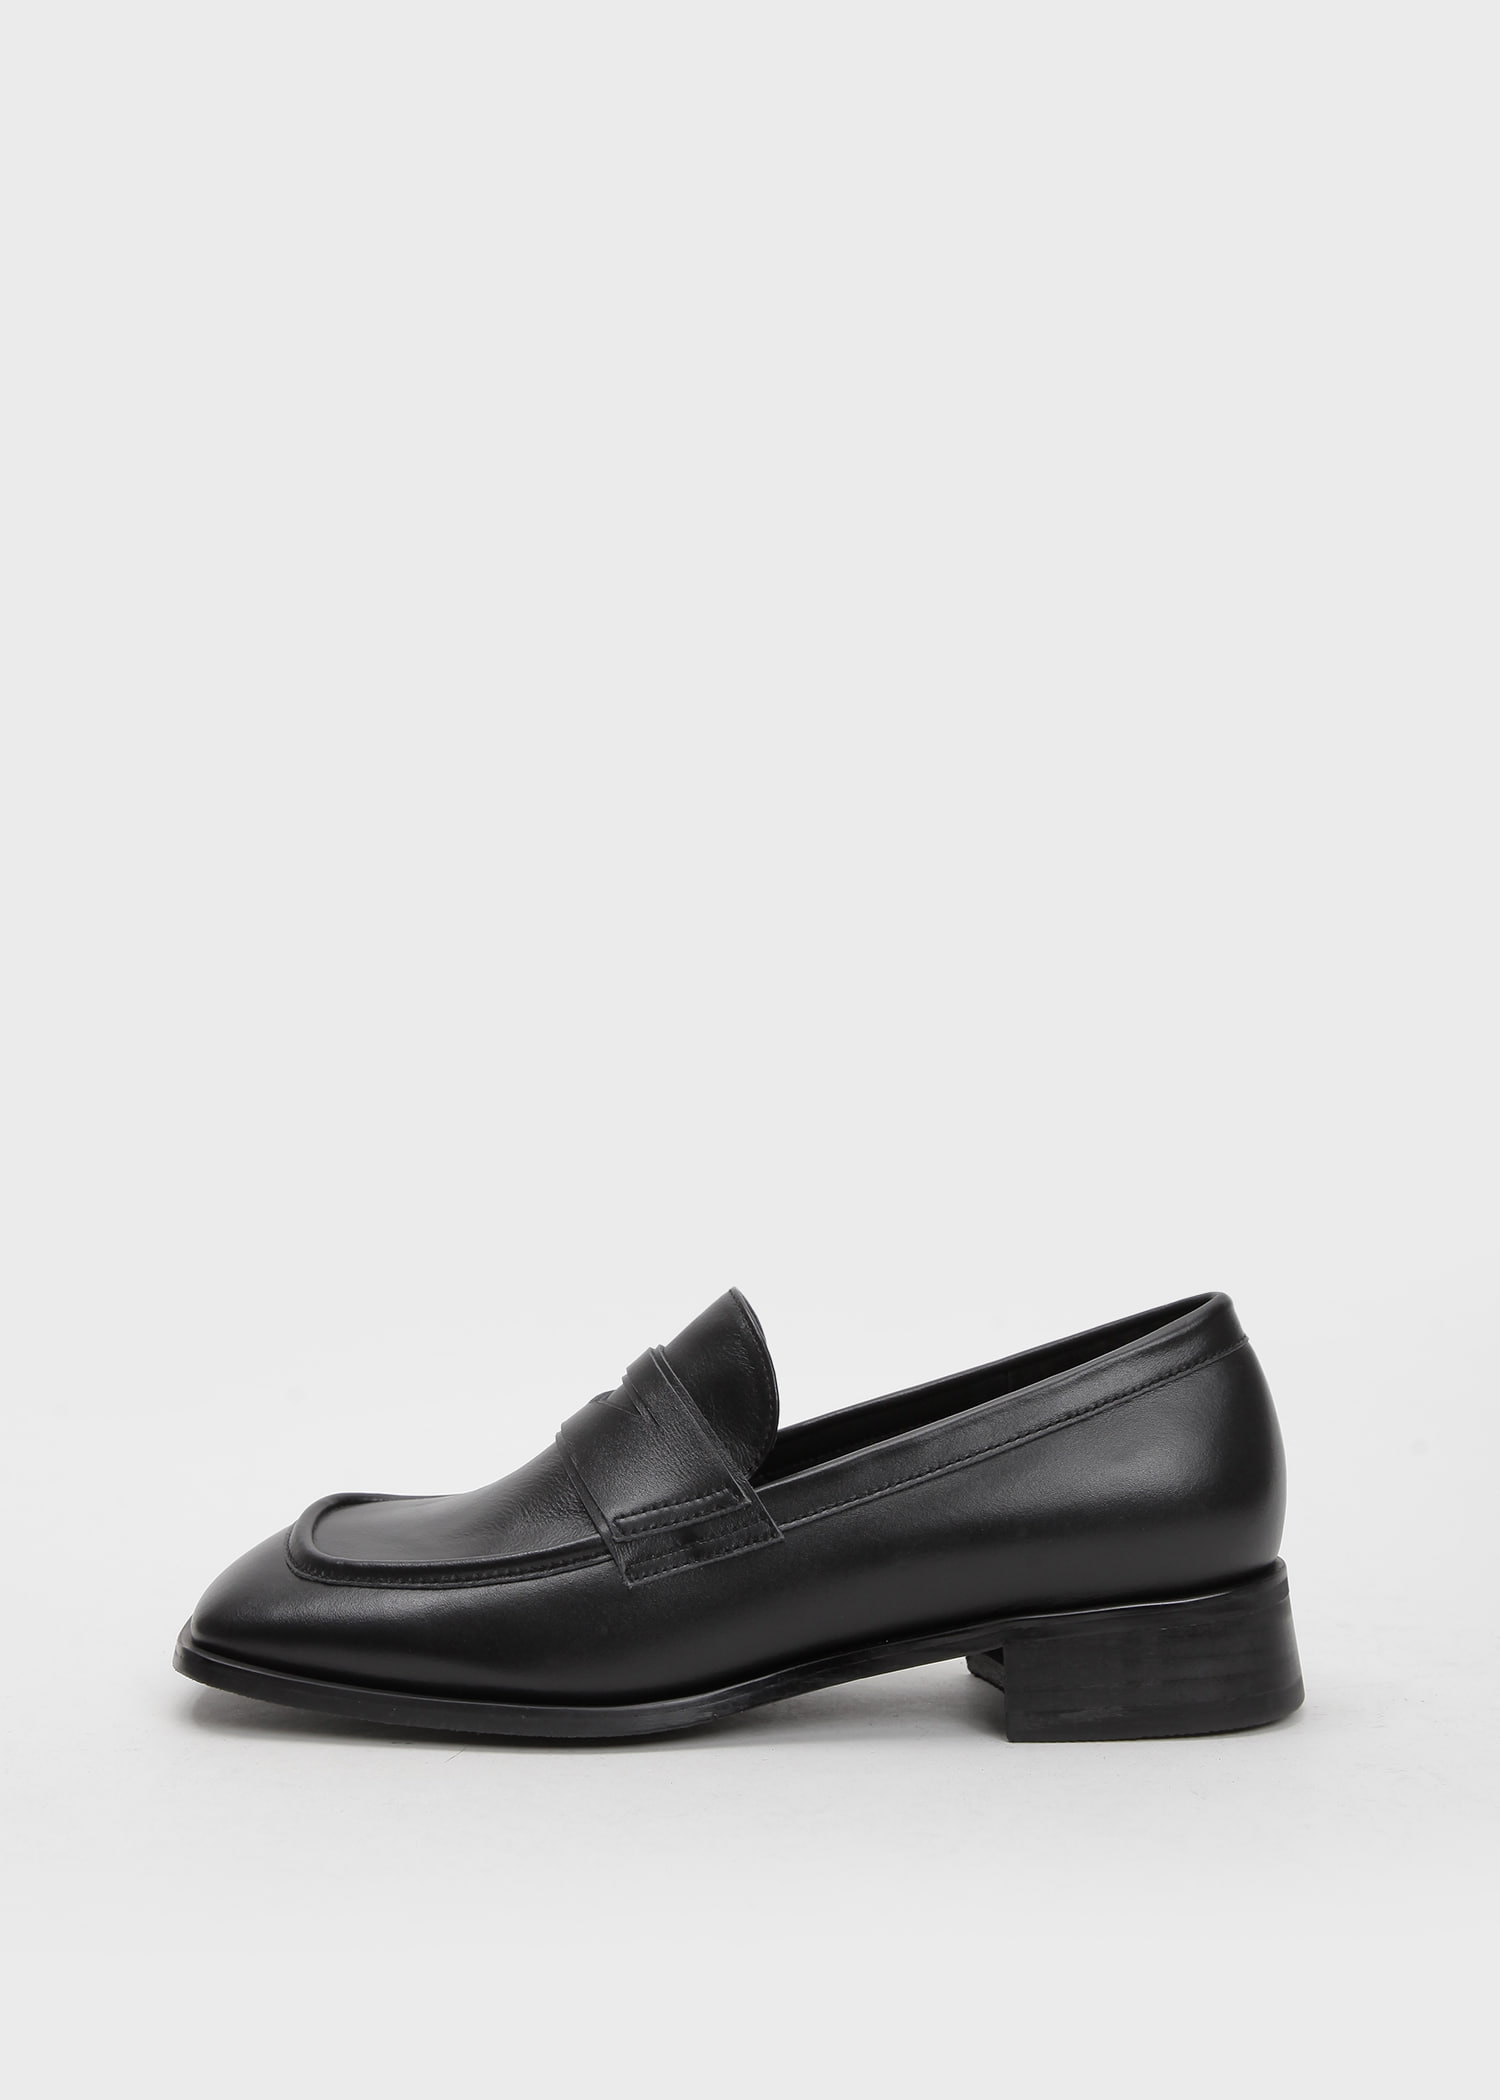 LAYERED SQUARE LOAFER [C2S03 BK]